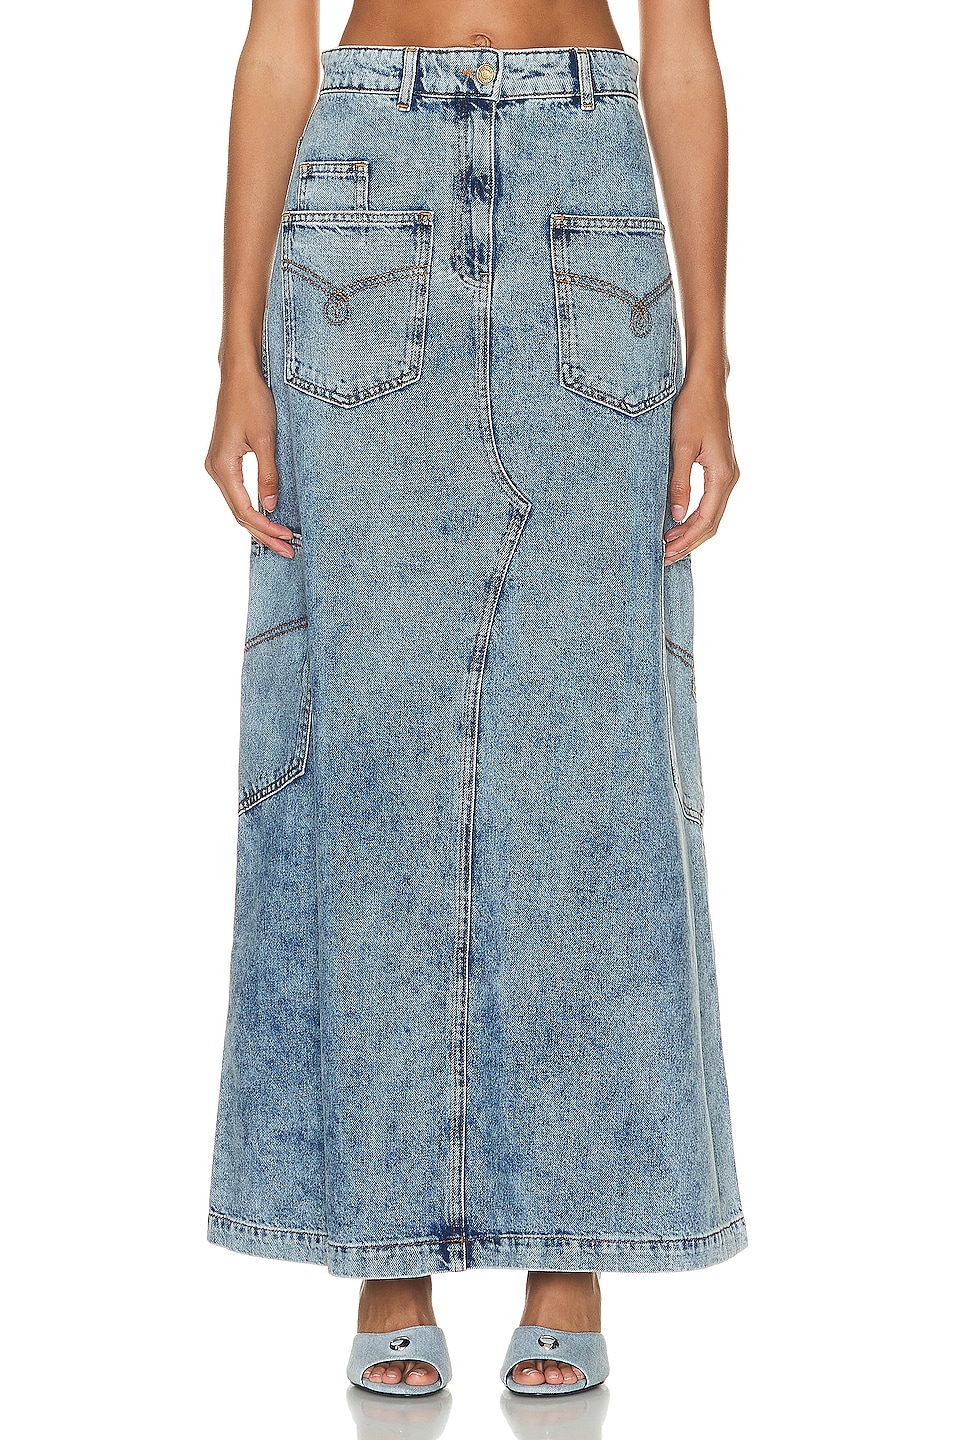 Image 1 of Moschino Jeans Long Denim Skirt in Fantasy Print Blue